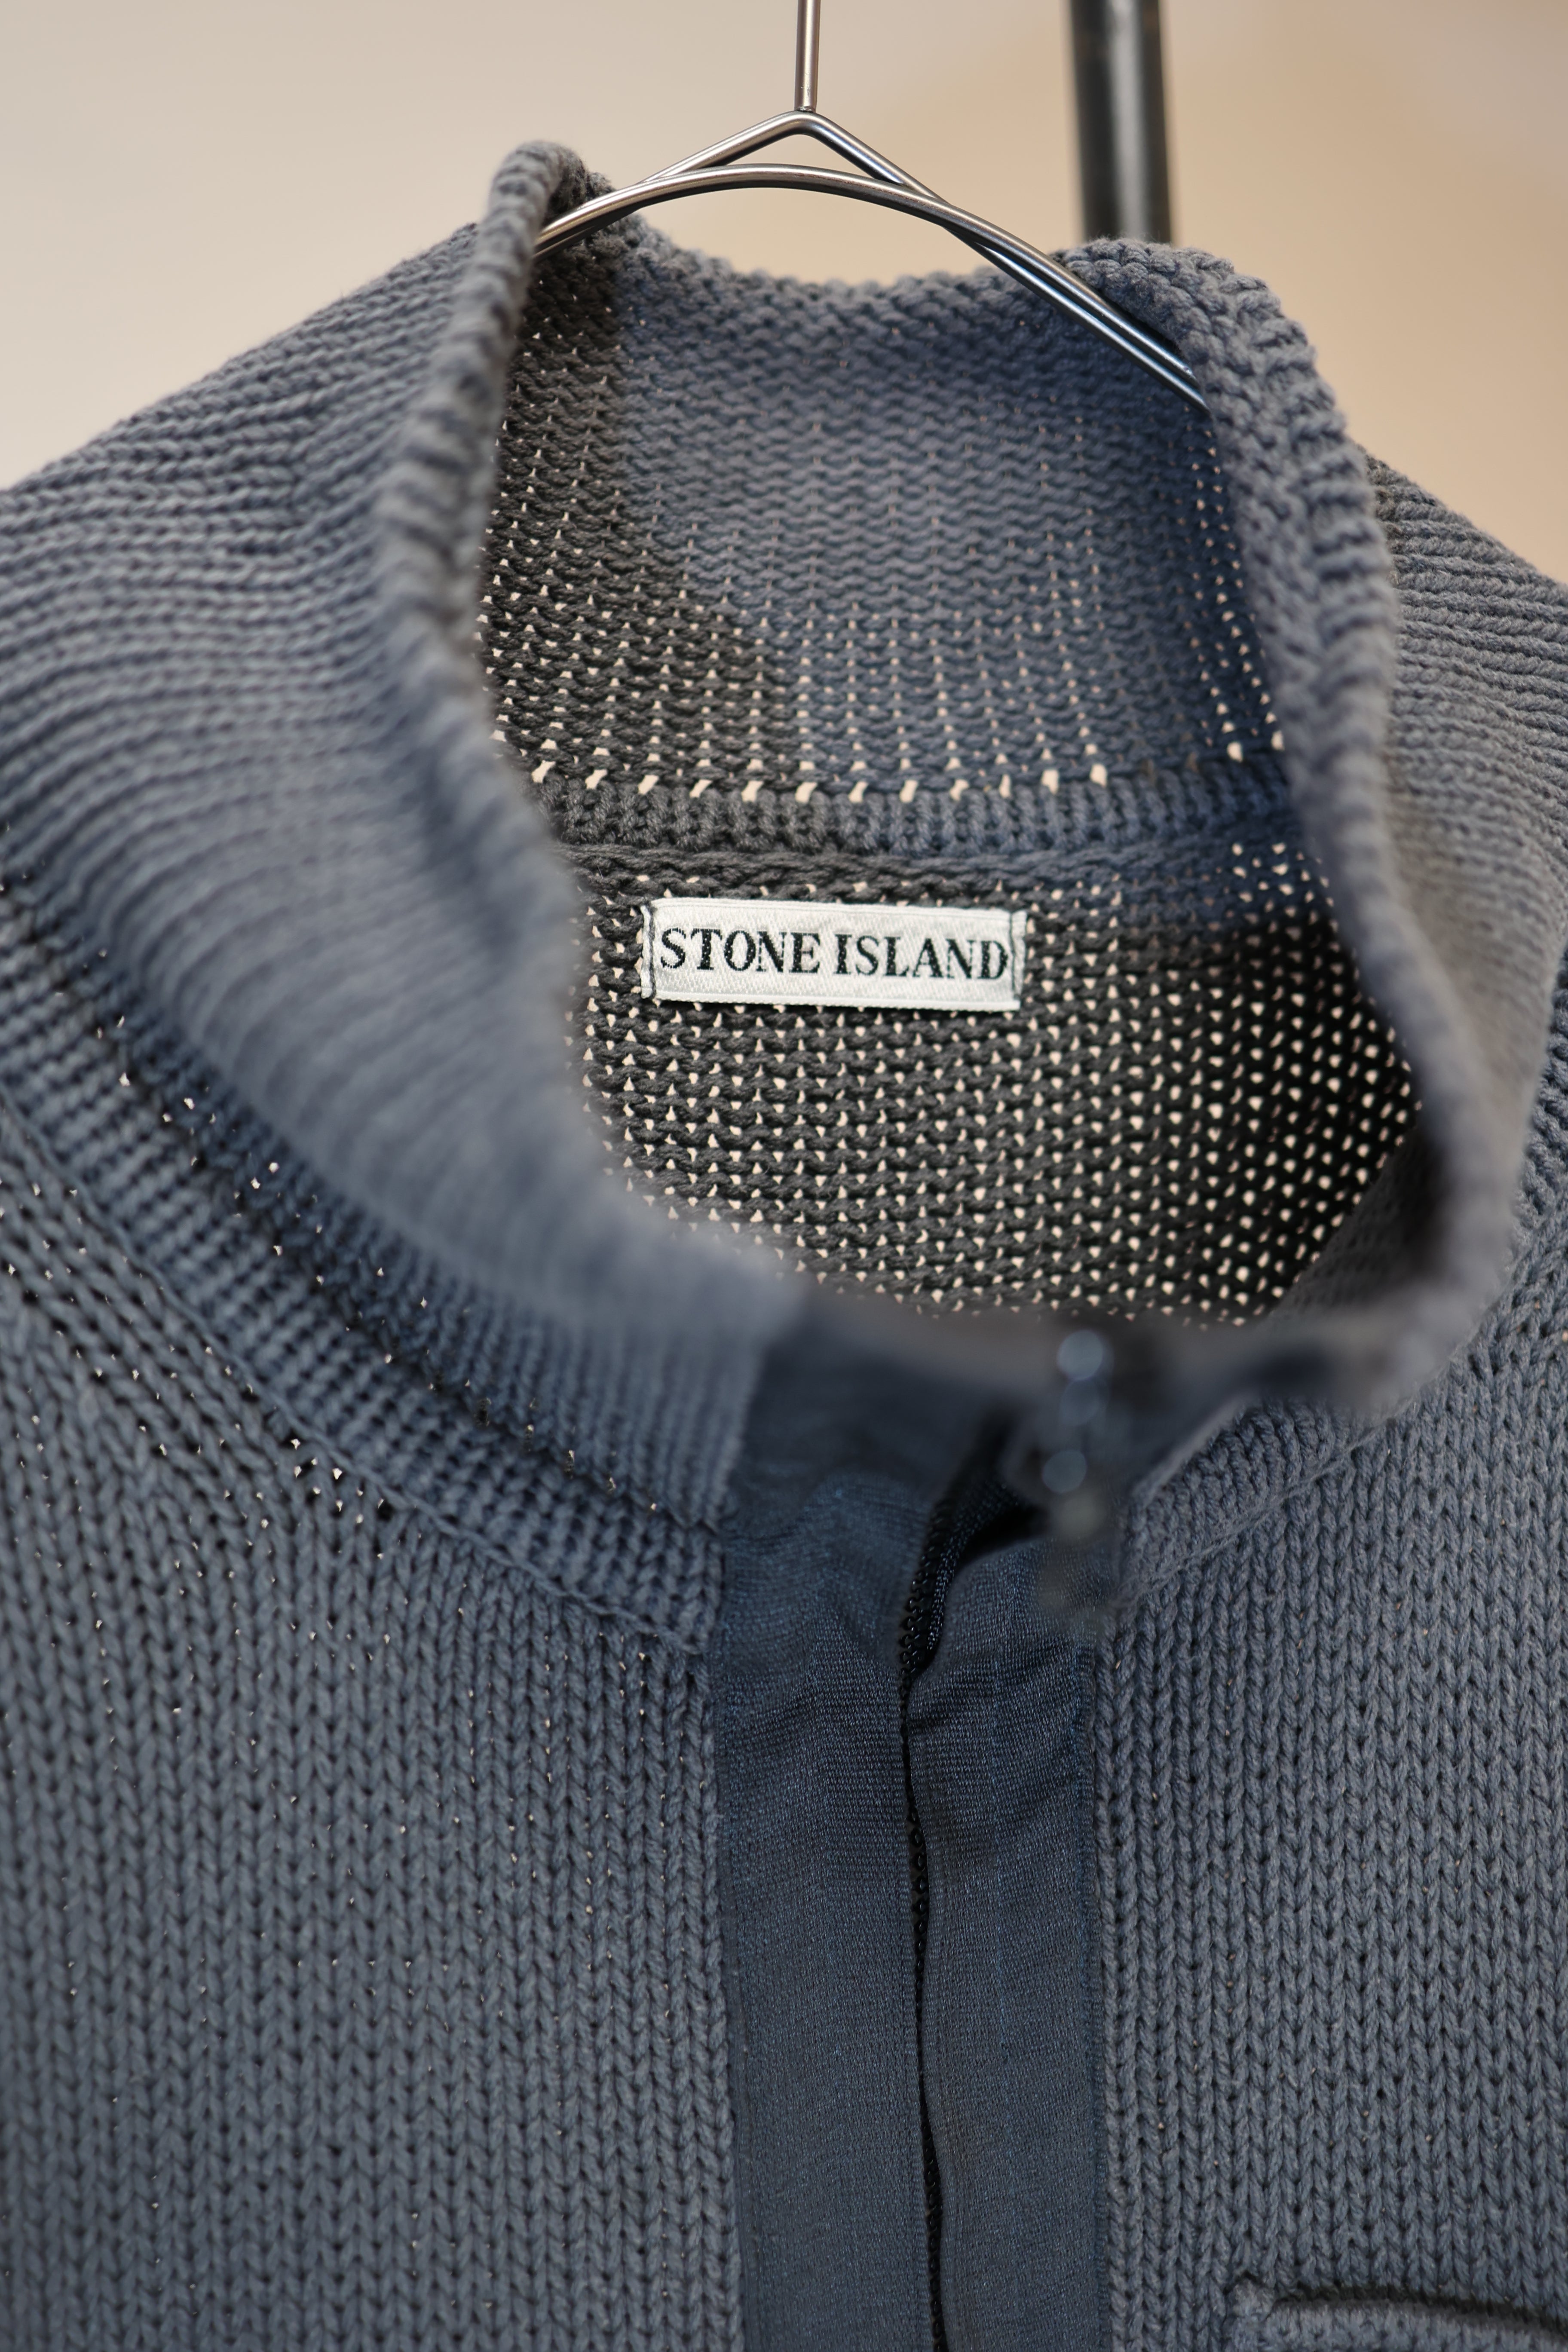 90's STONE ISLAND cotton drivers knit with big pocket